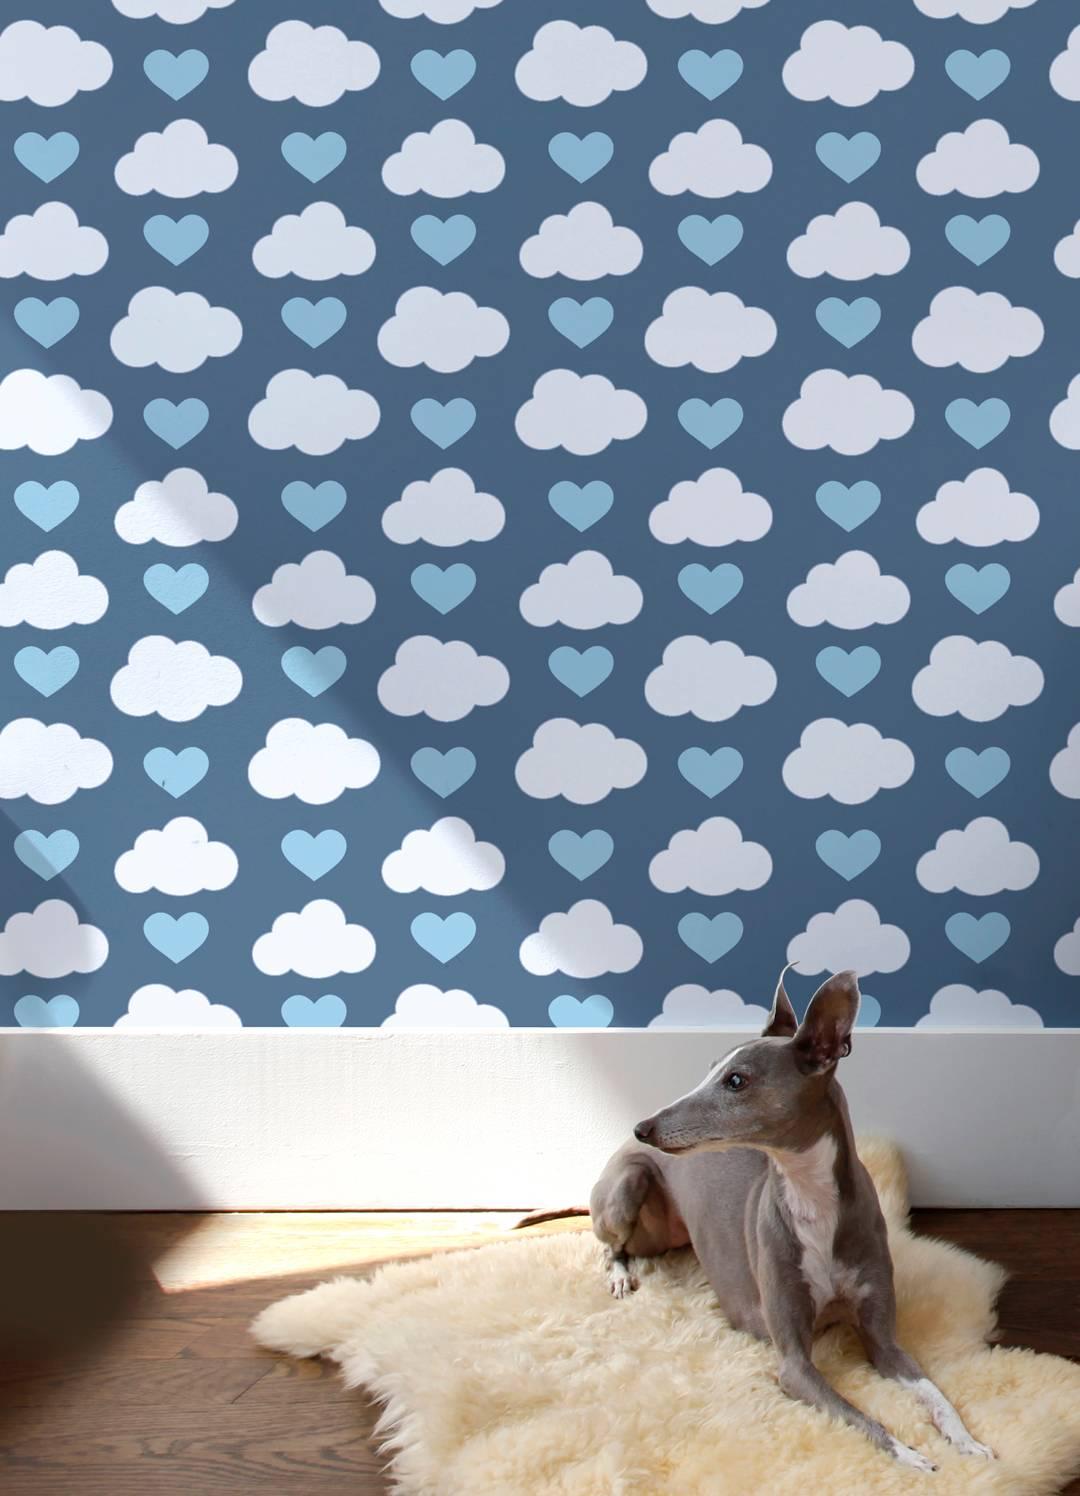 This hand-printed wall-covering is as simple as it is elegant! Hearts and clouds... the perfect wallpaper for your child's room, playroom or nursery.
 
Samples are available for $18 including US shipping, please message us to purchase.  

Printing: